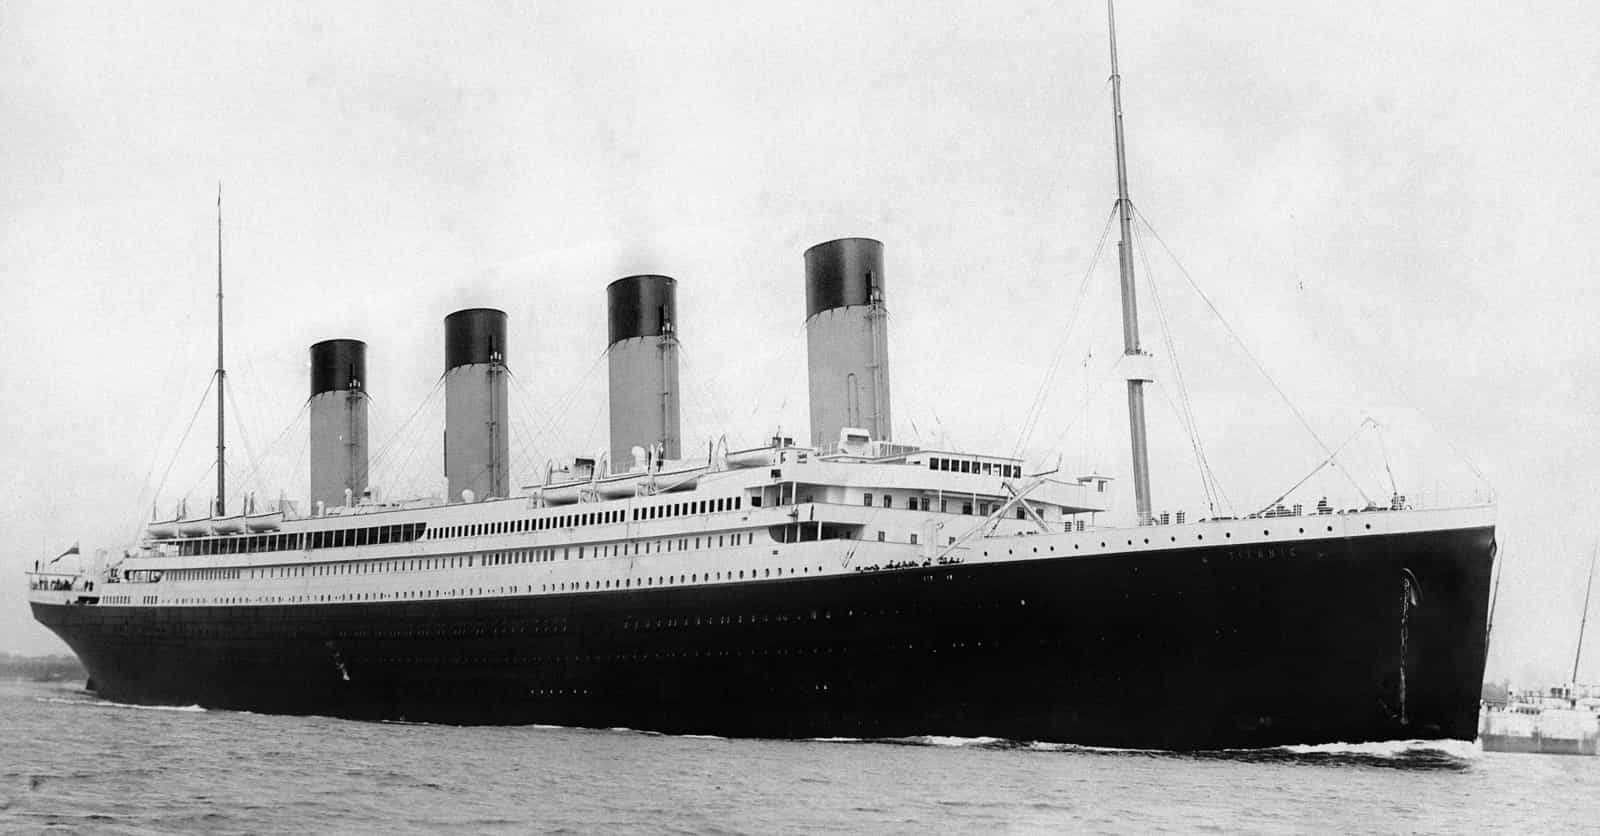 The Titanic Wreckage Was Discovered During A Secret Cold War Mission